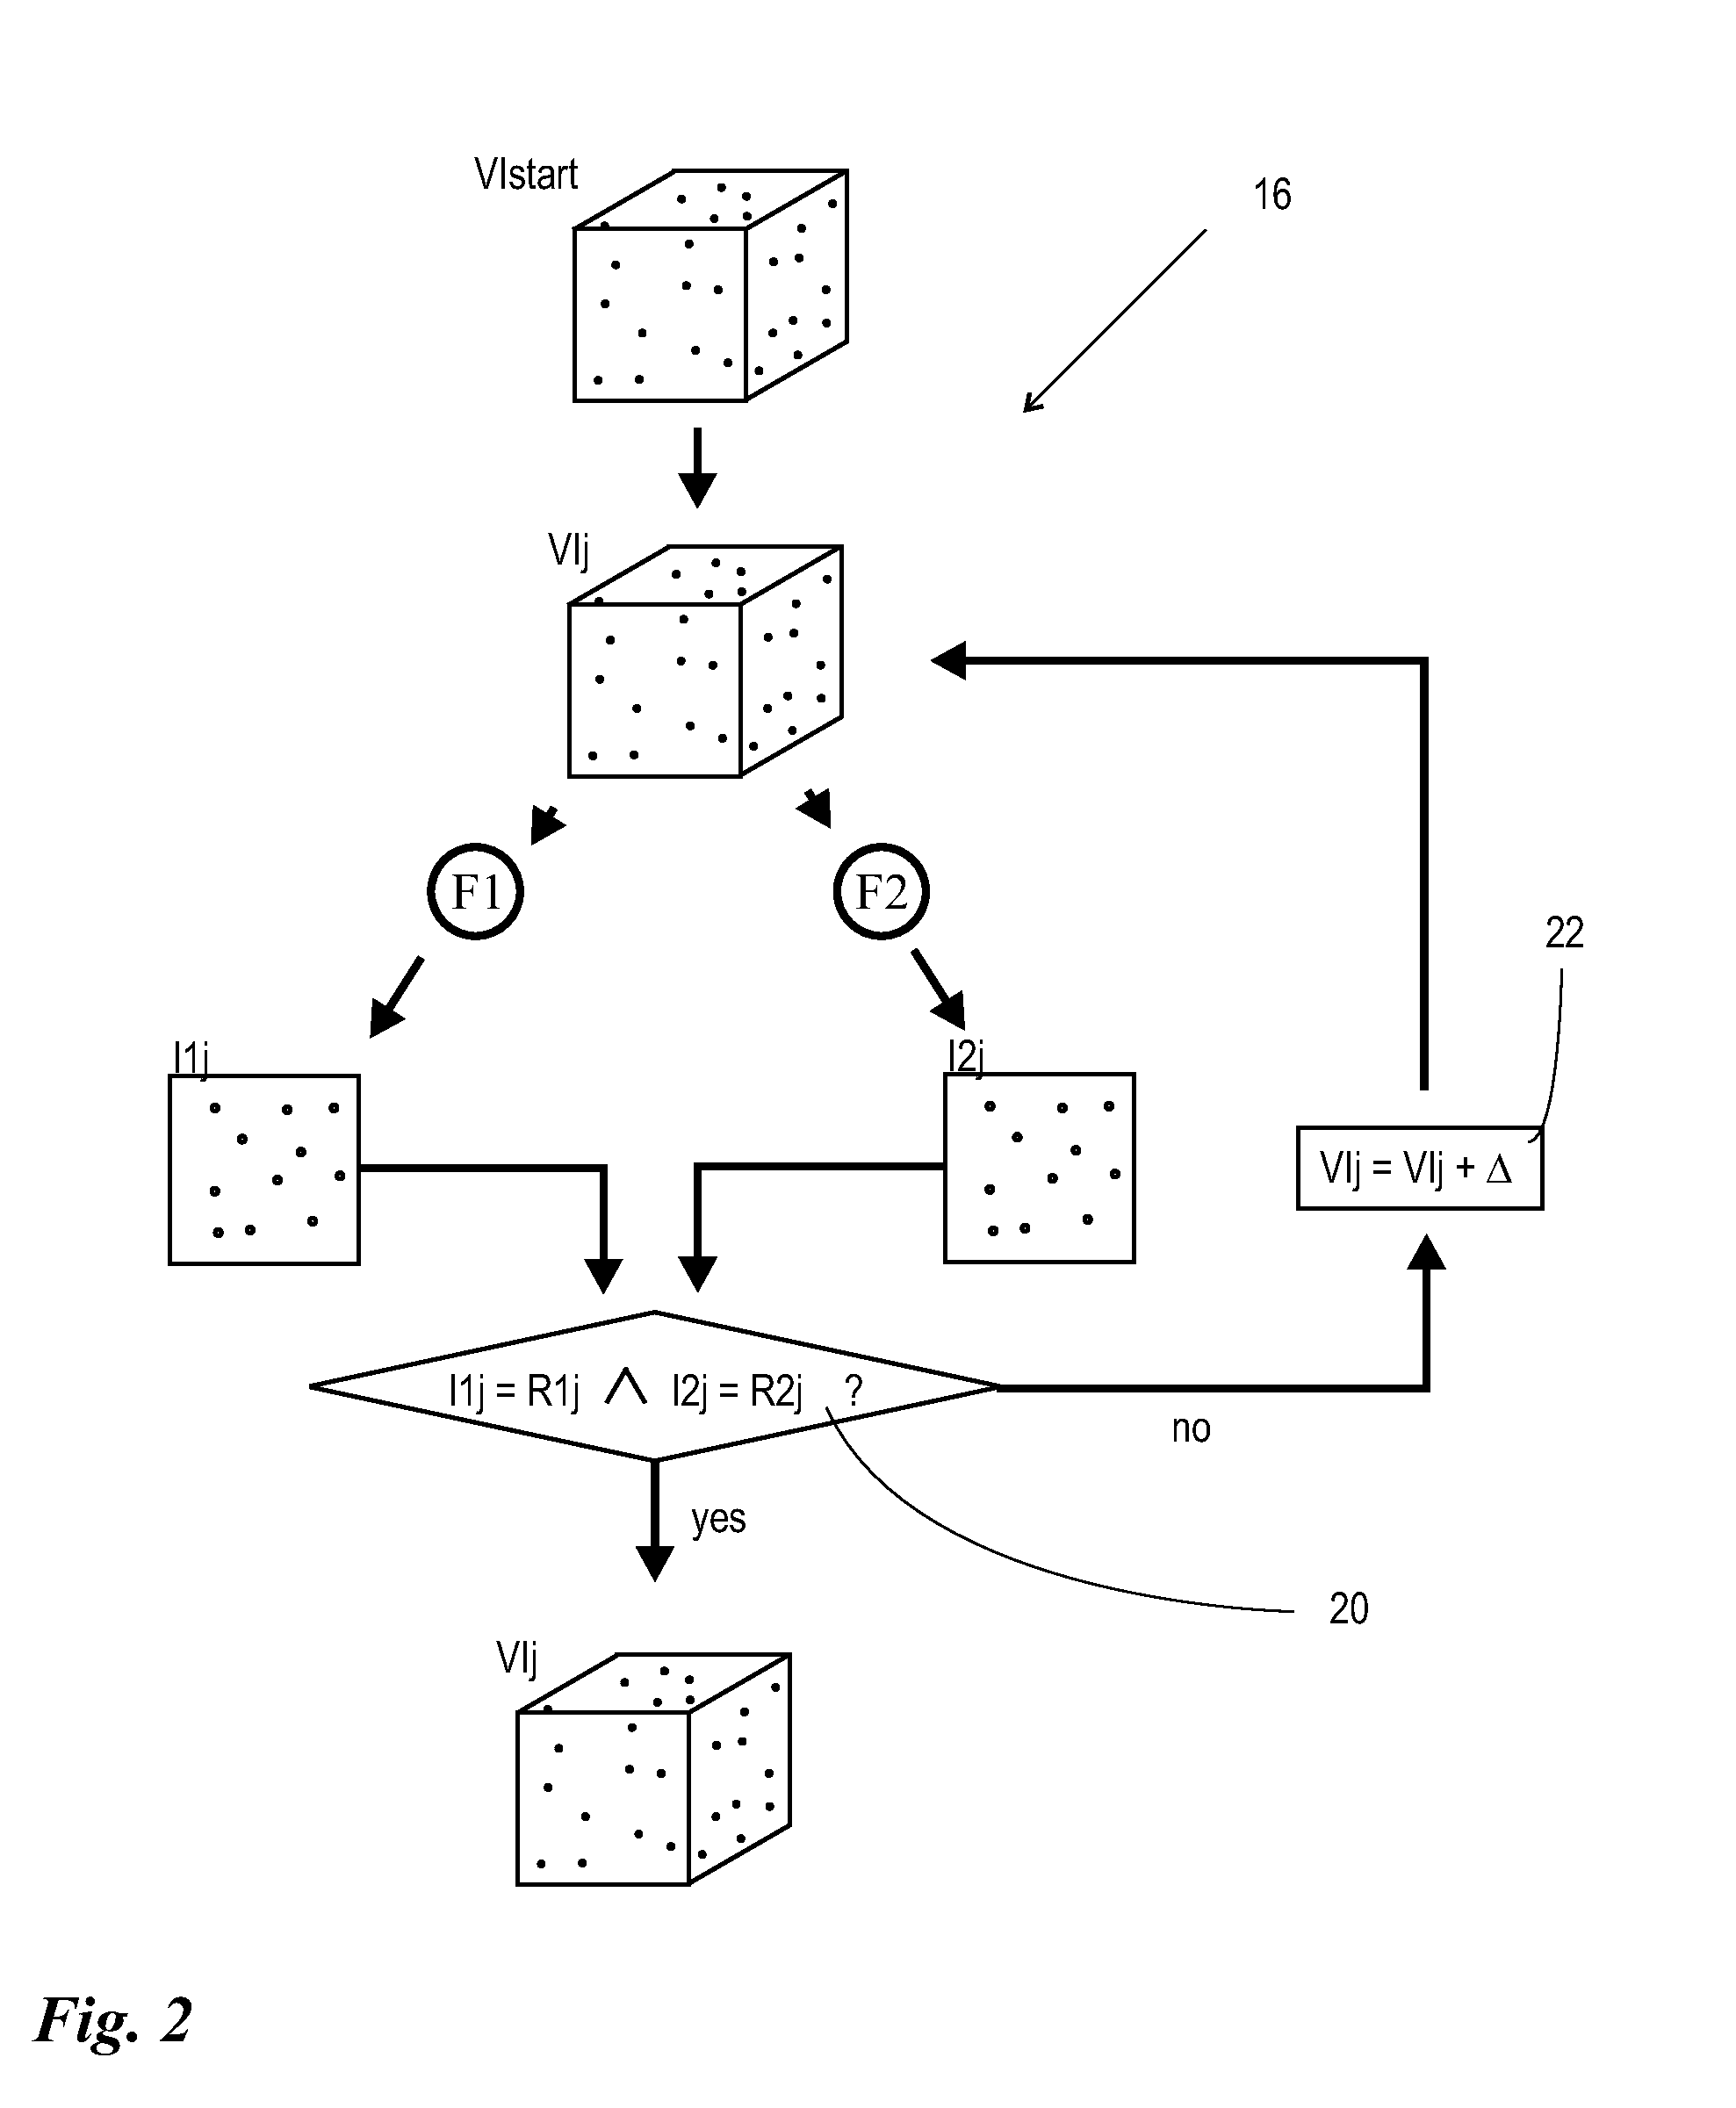 Method for Determining Flow Conditions